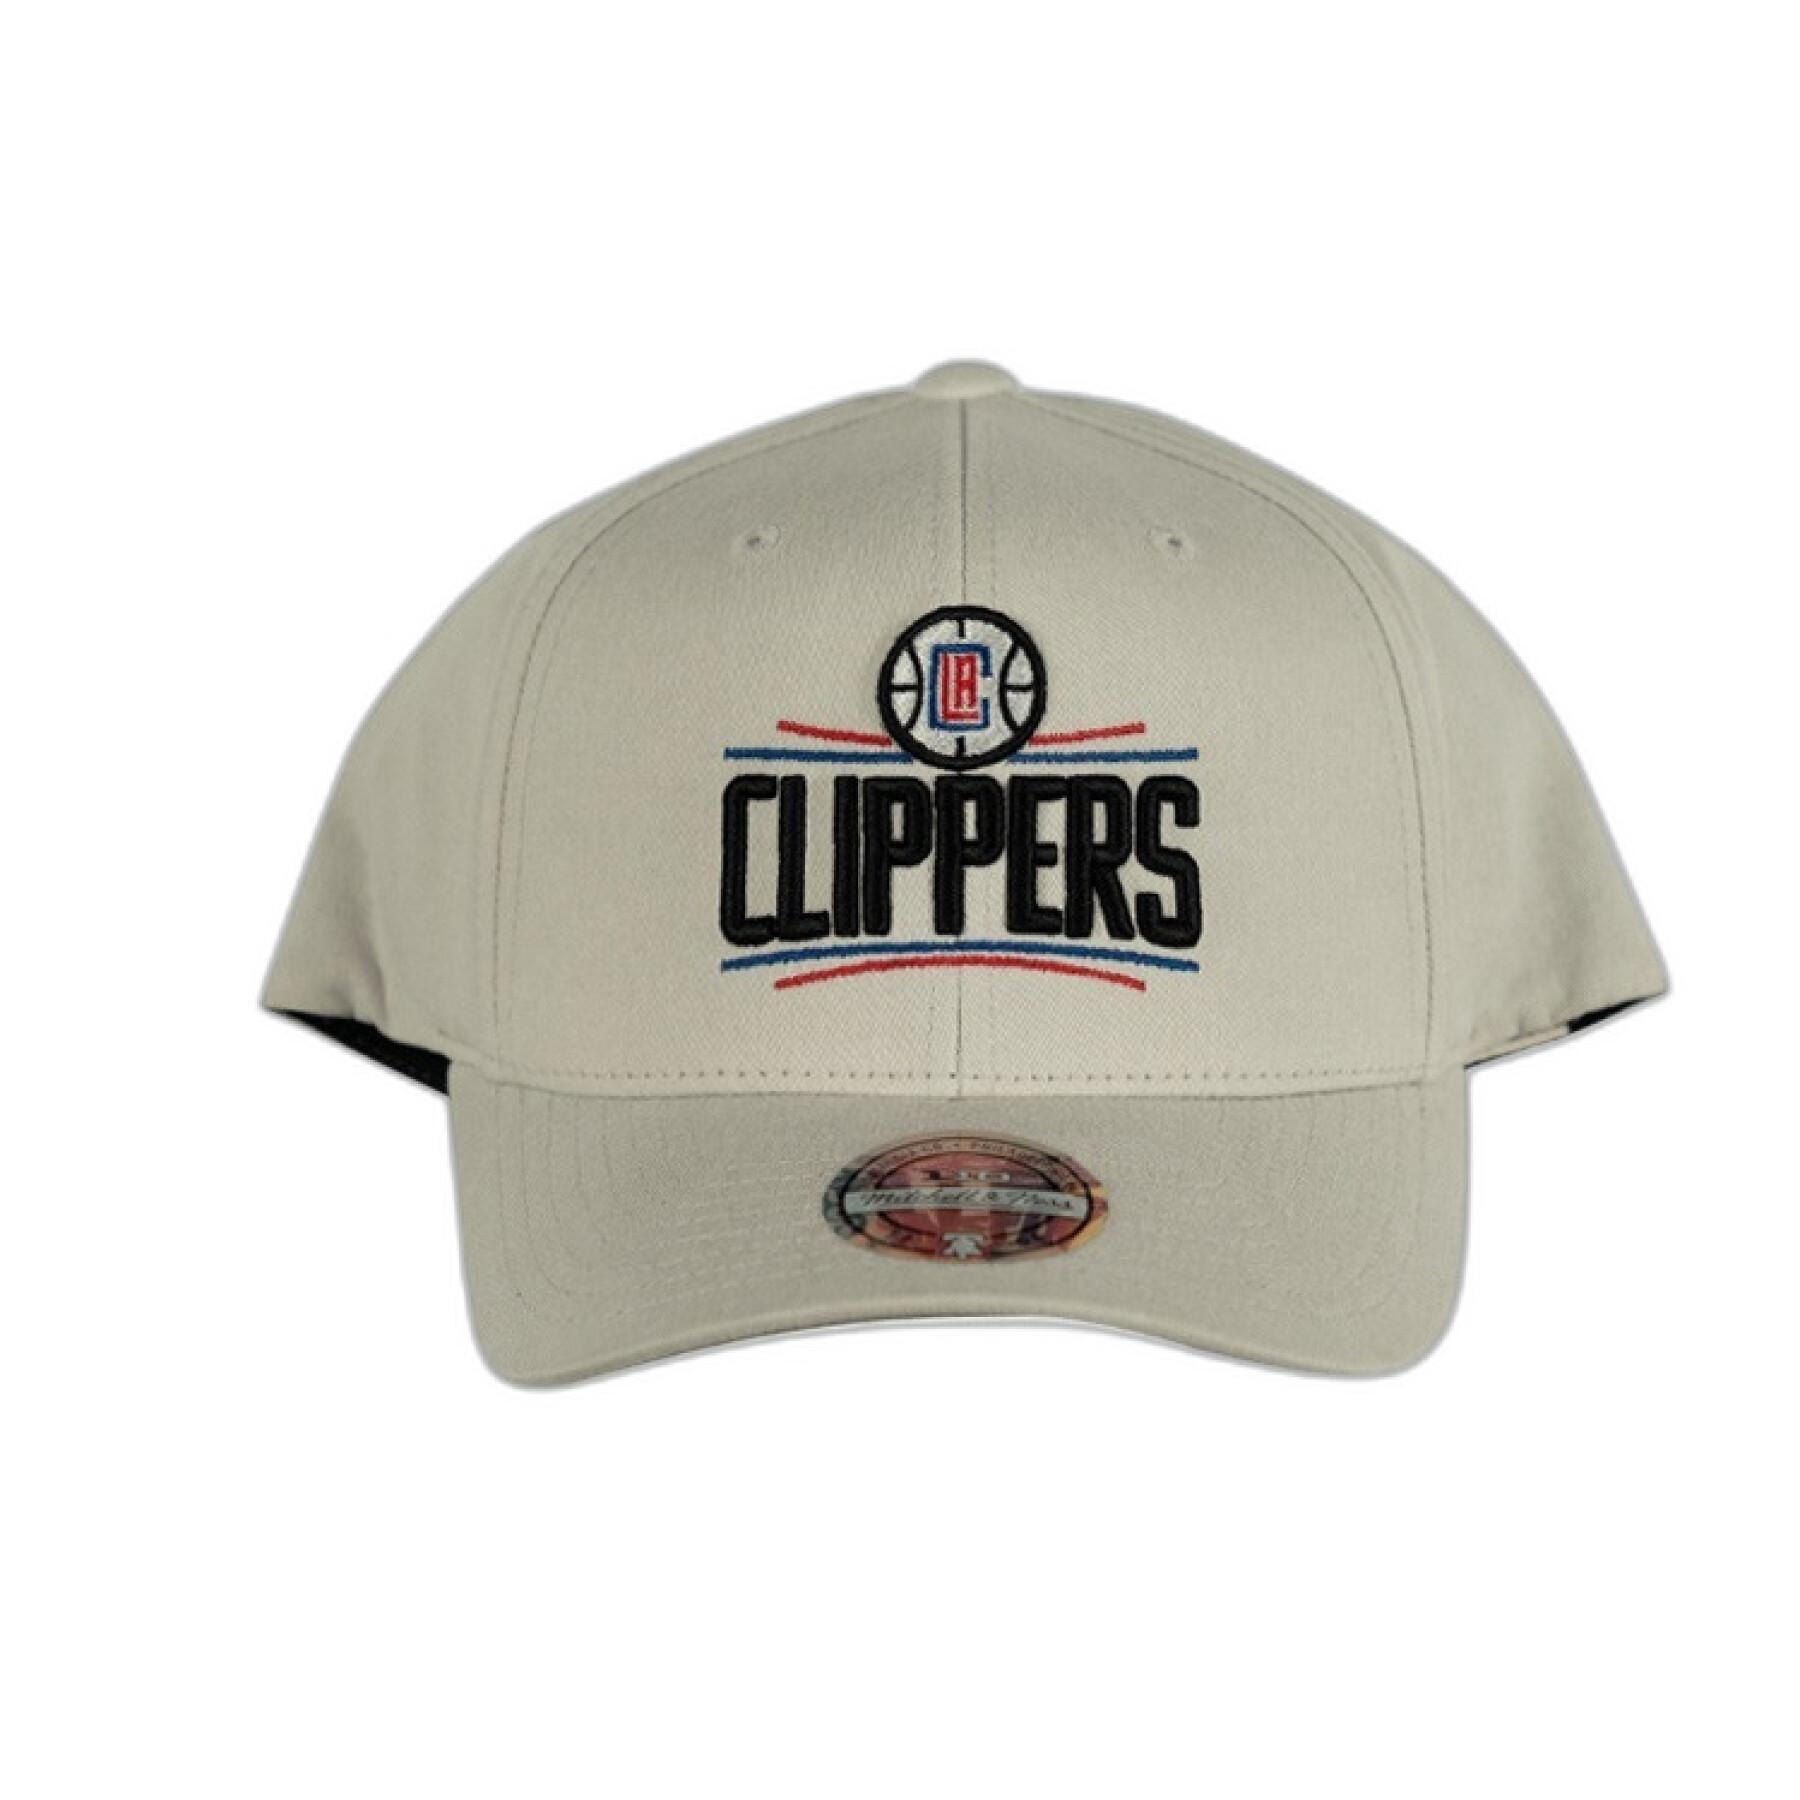 Casquette Los Angeles Clippers washout 110